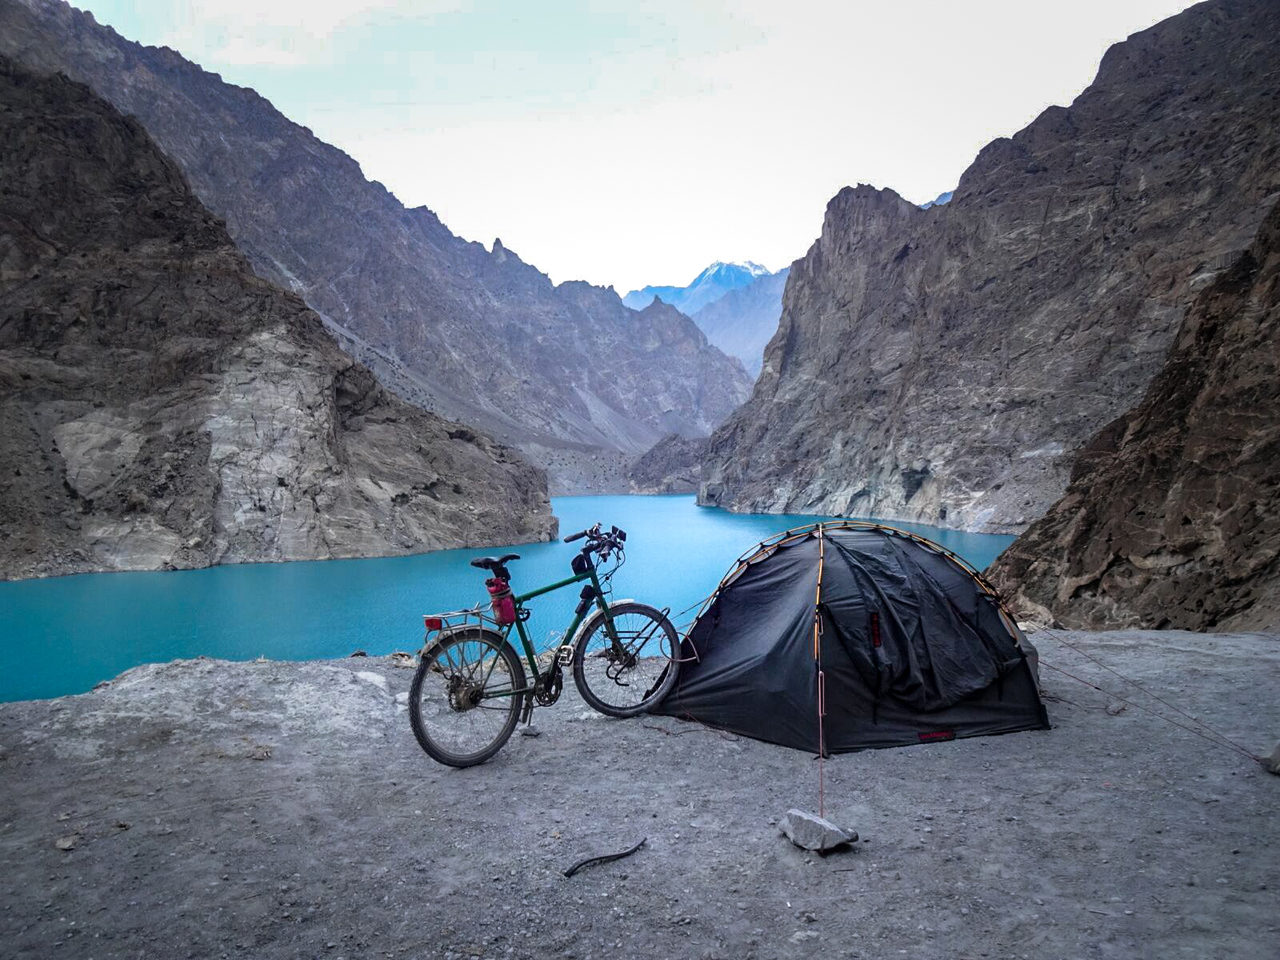 Camping above Attabad Lake in Pakistan